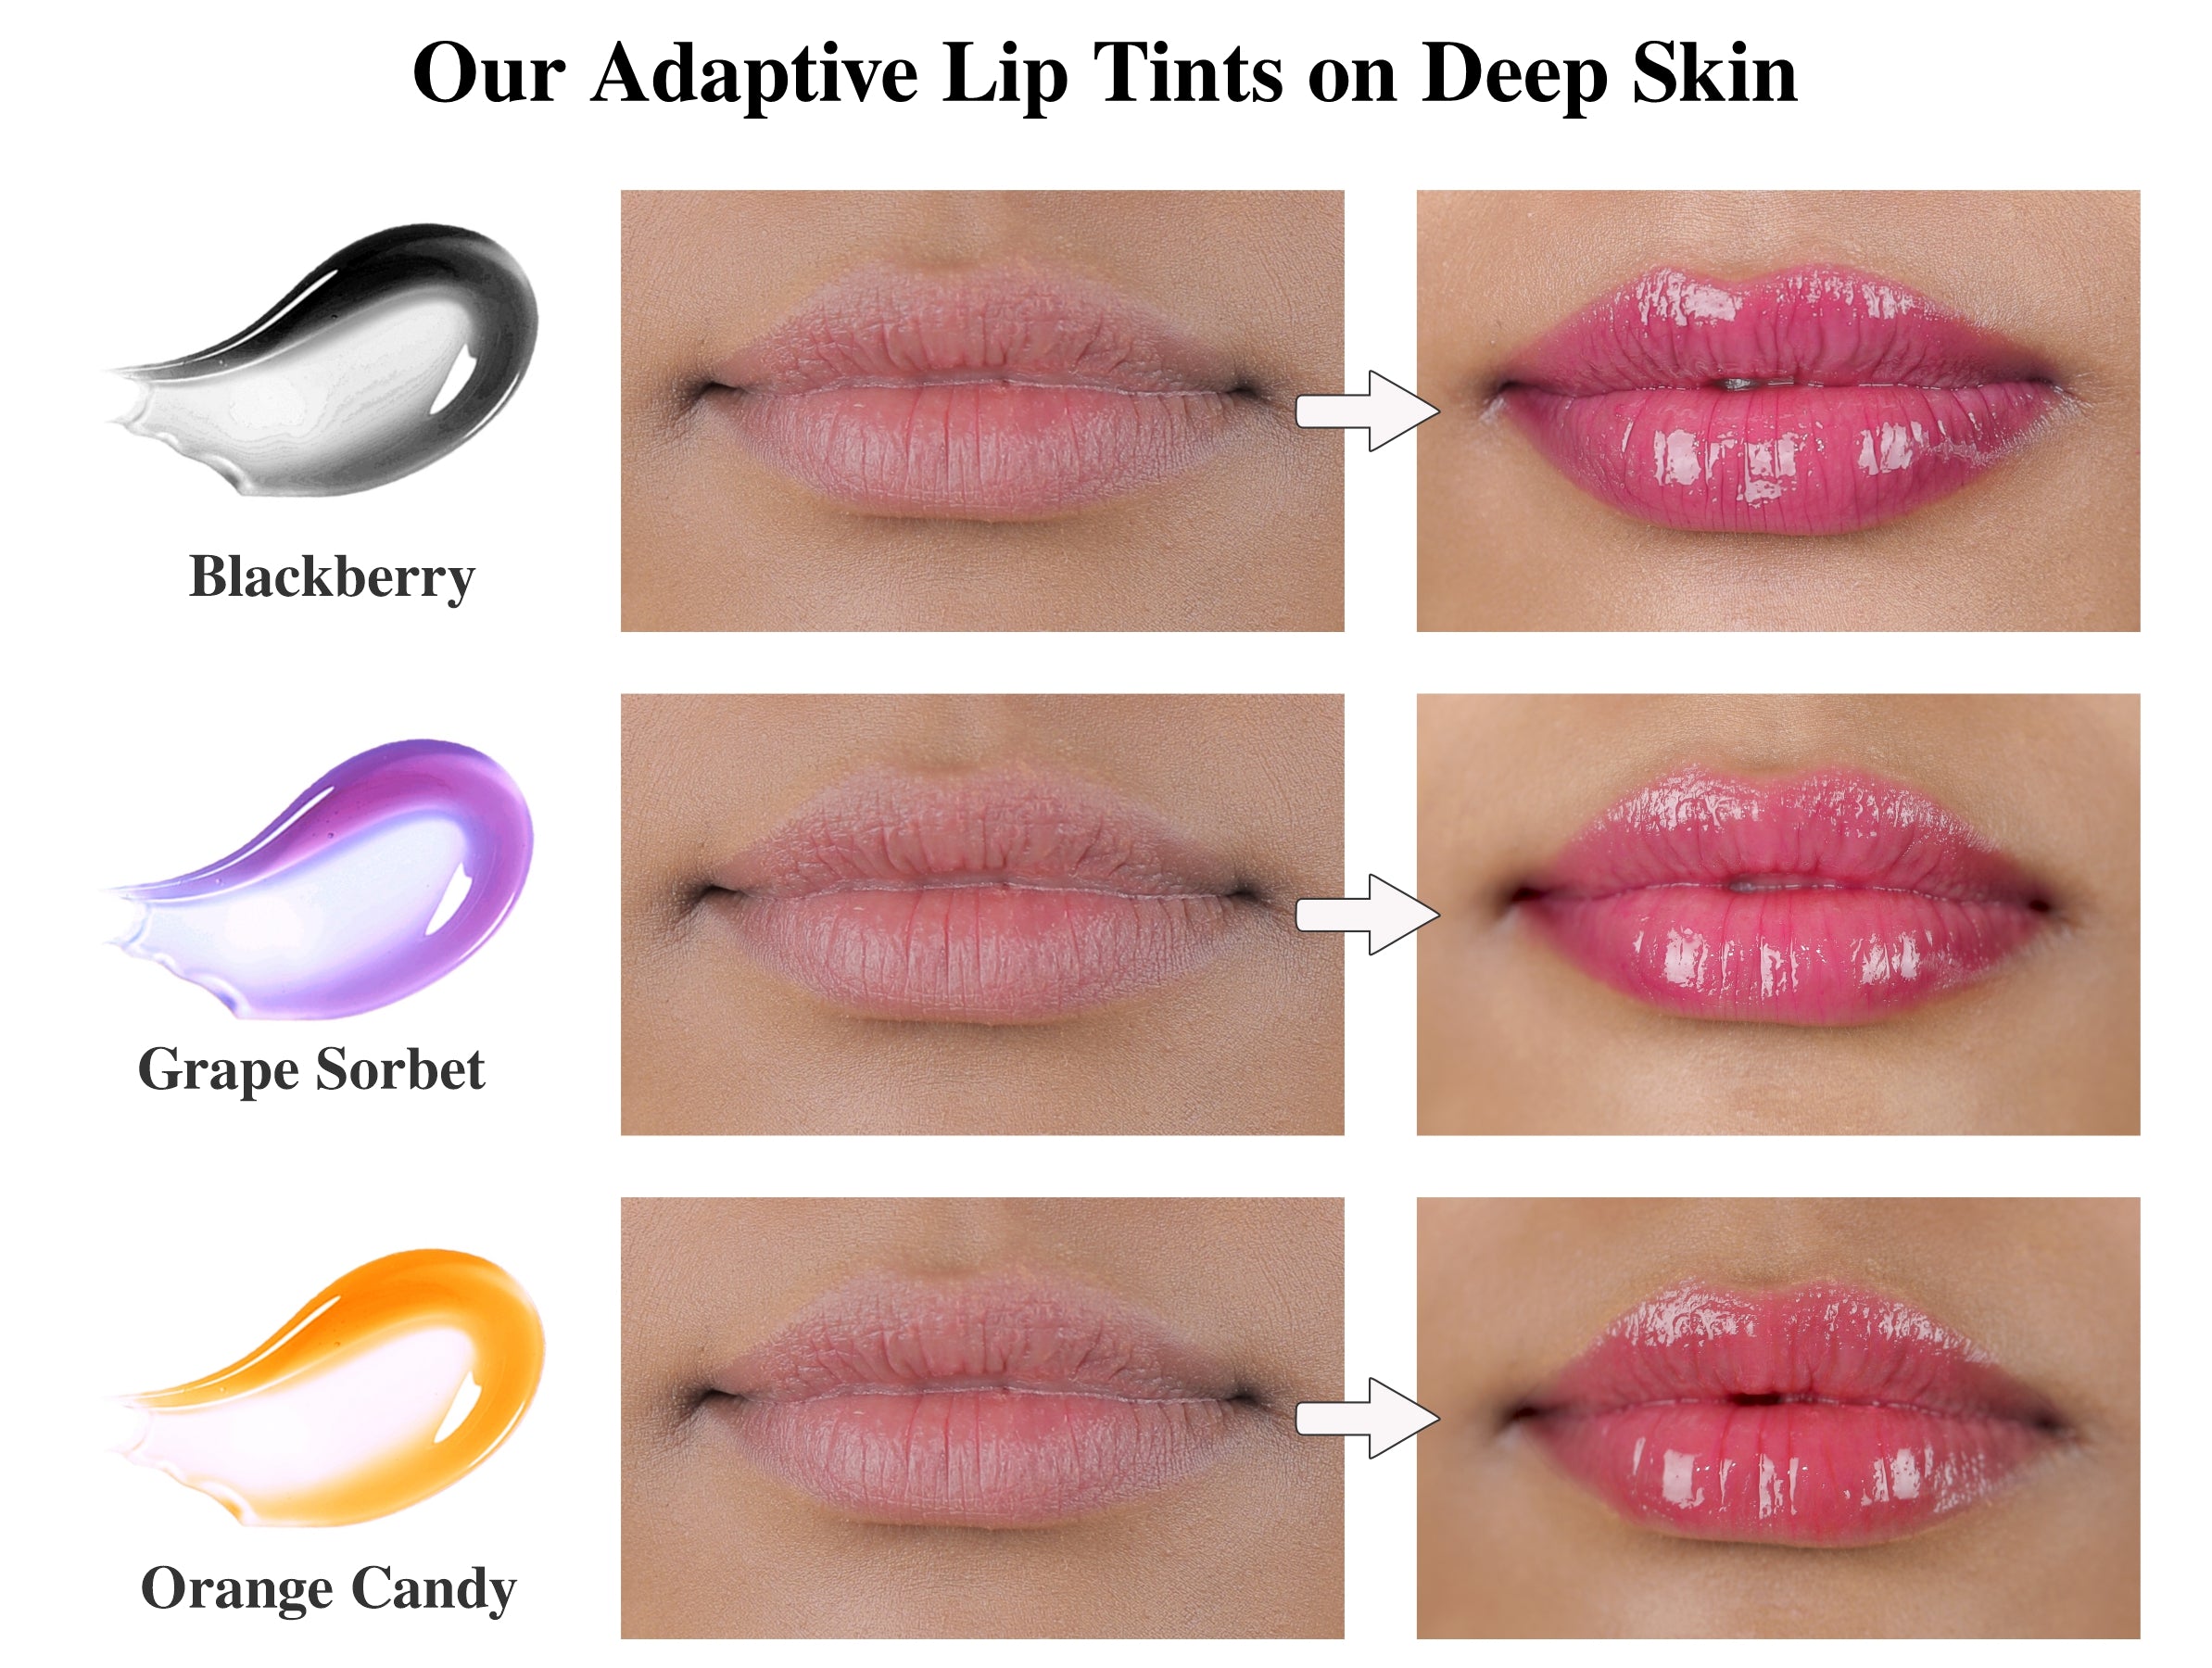 Only For You Adaptive Lip Tint – La Mior